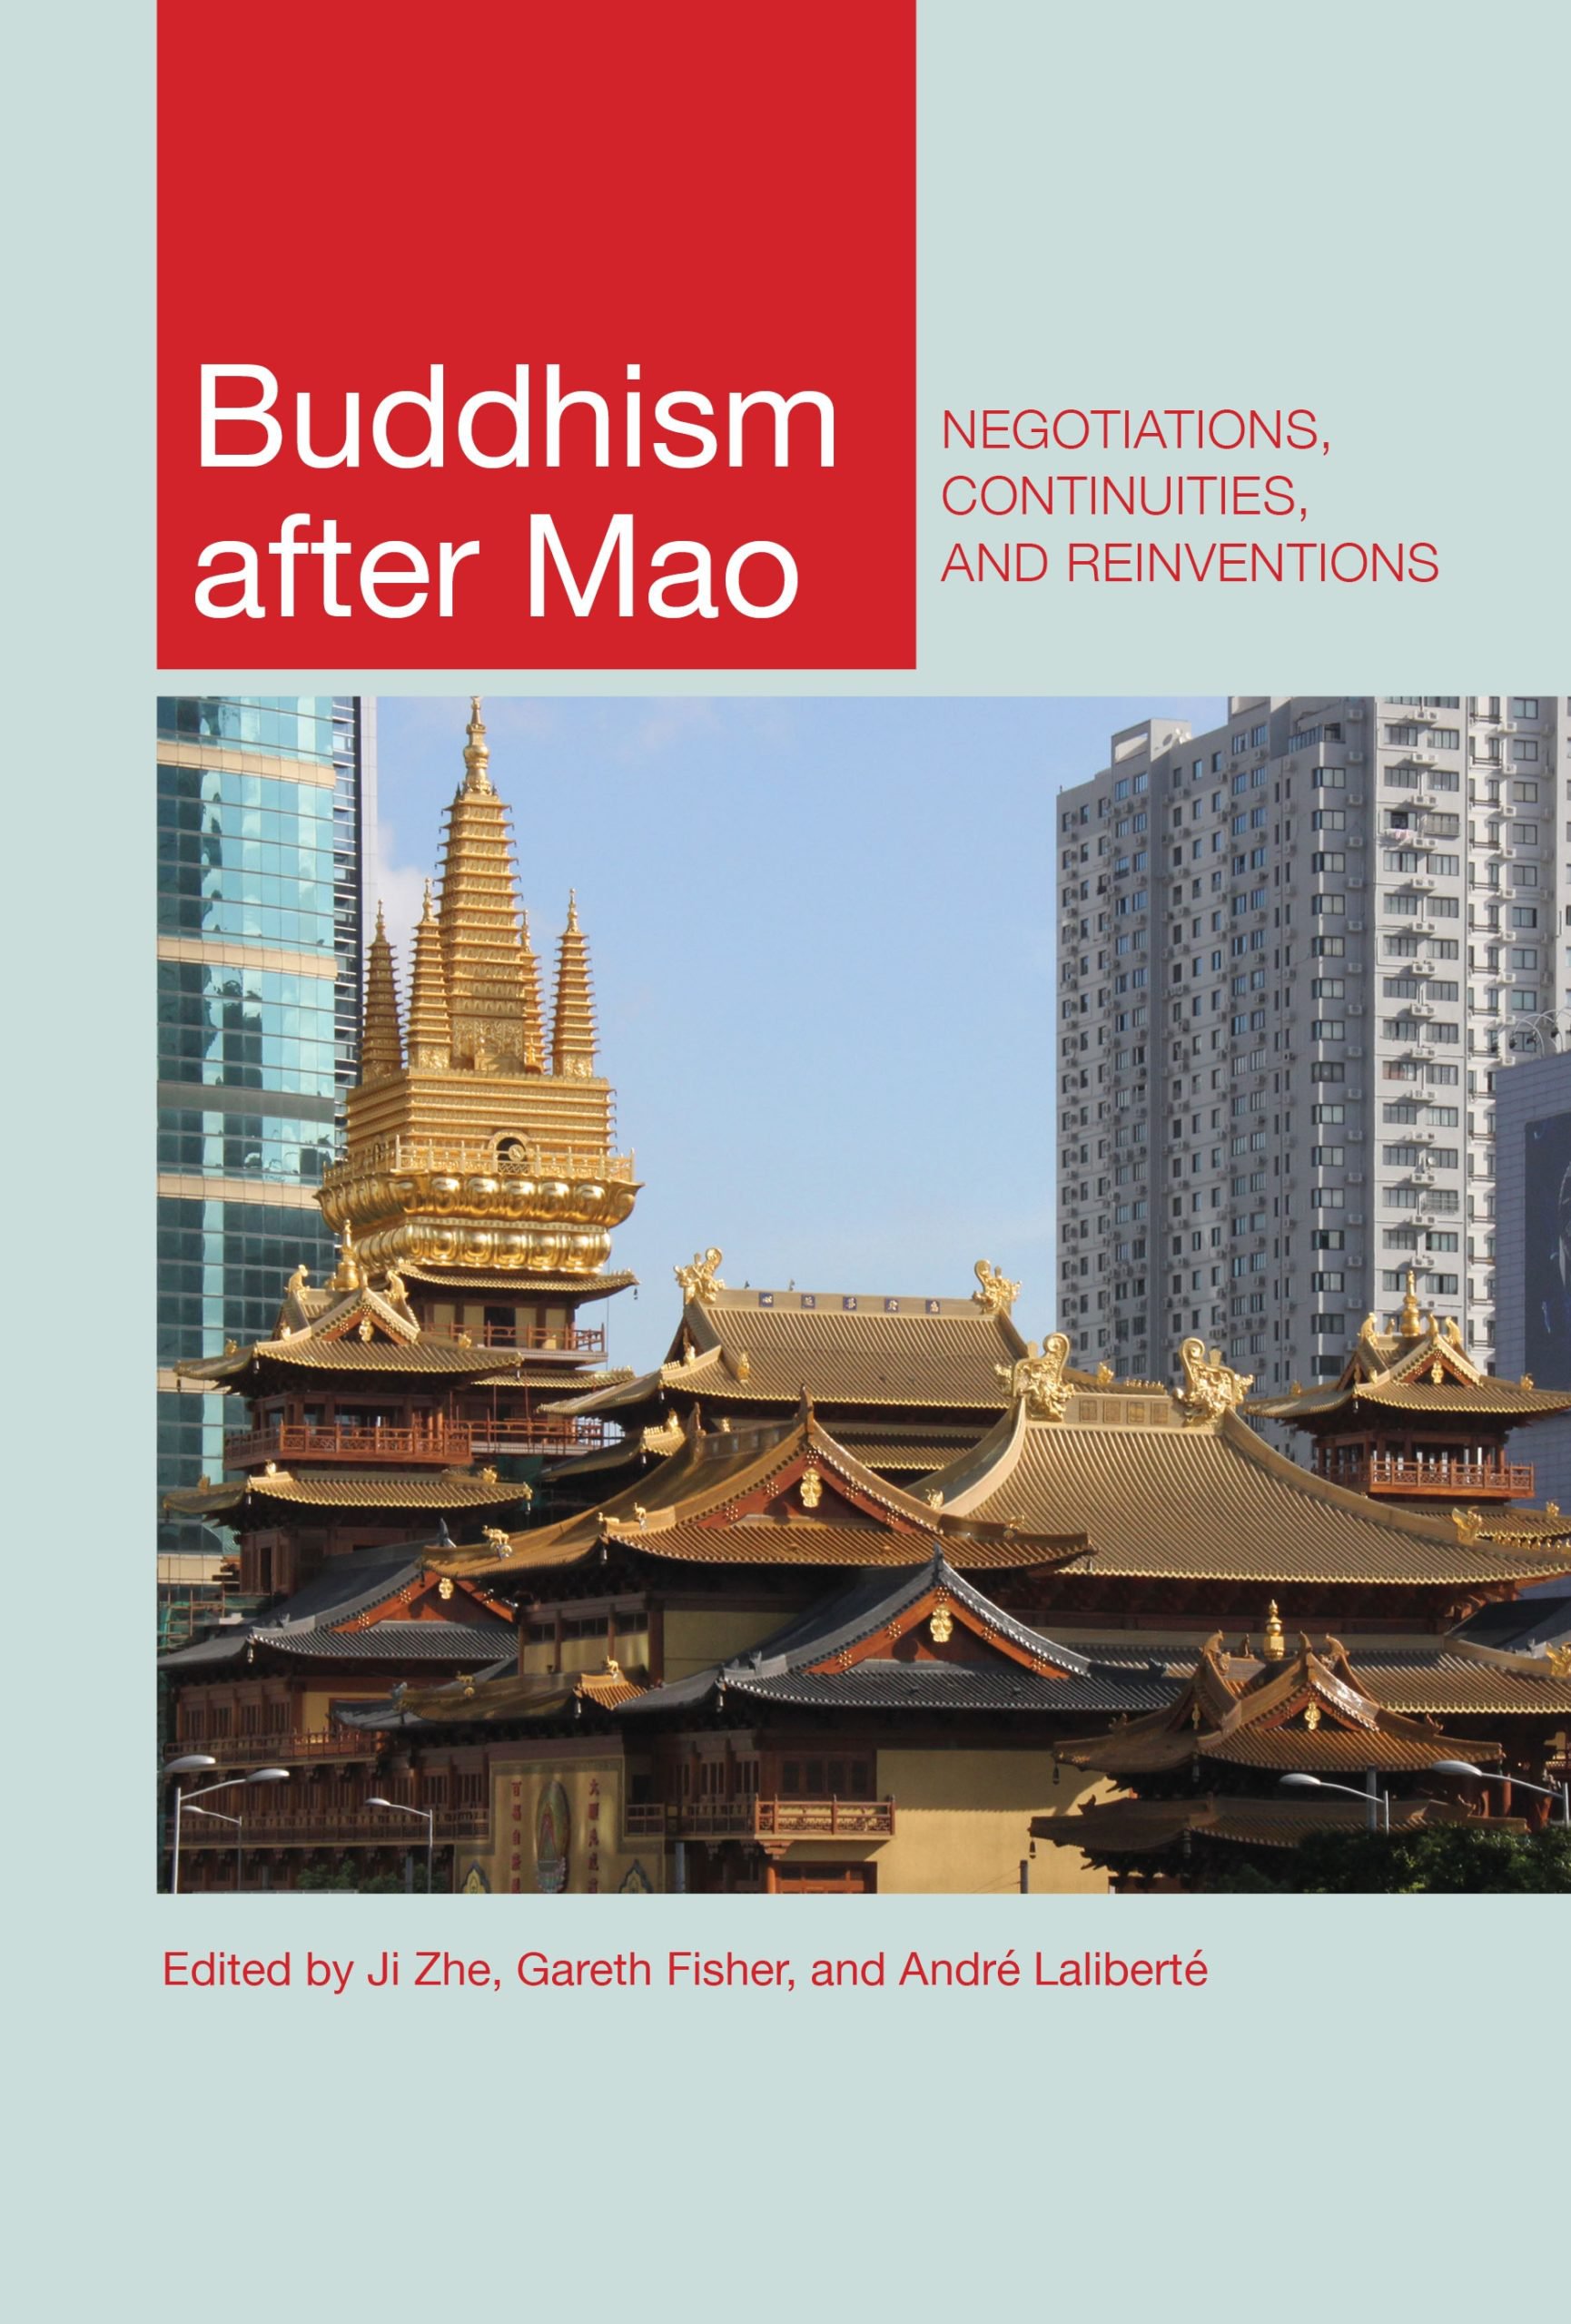 Buddhism after Mao: Negotiations, Continuities, and Reinventions